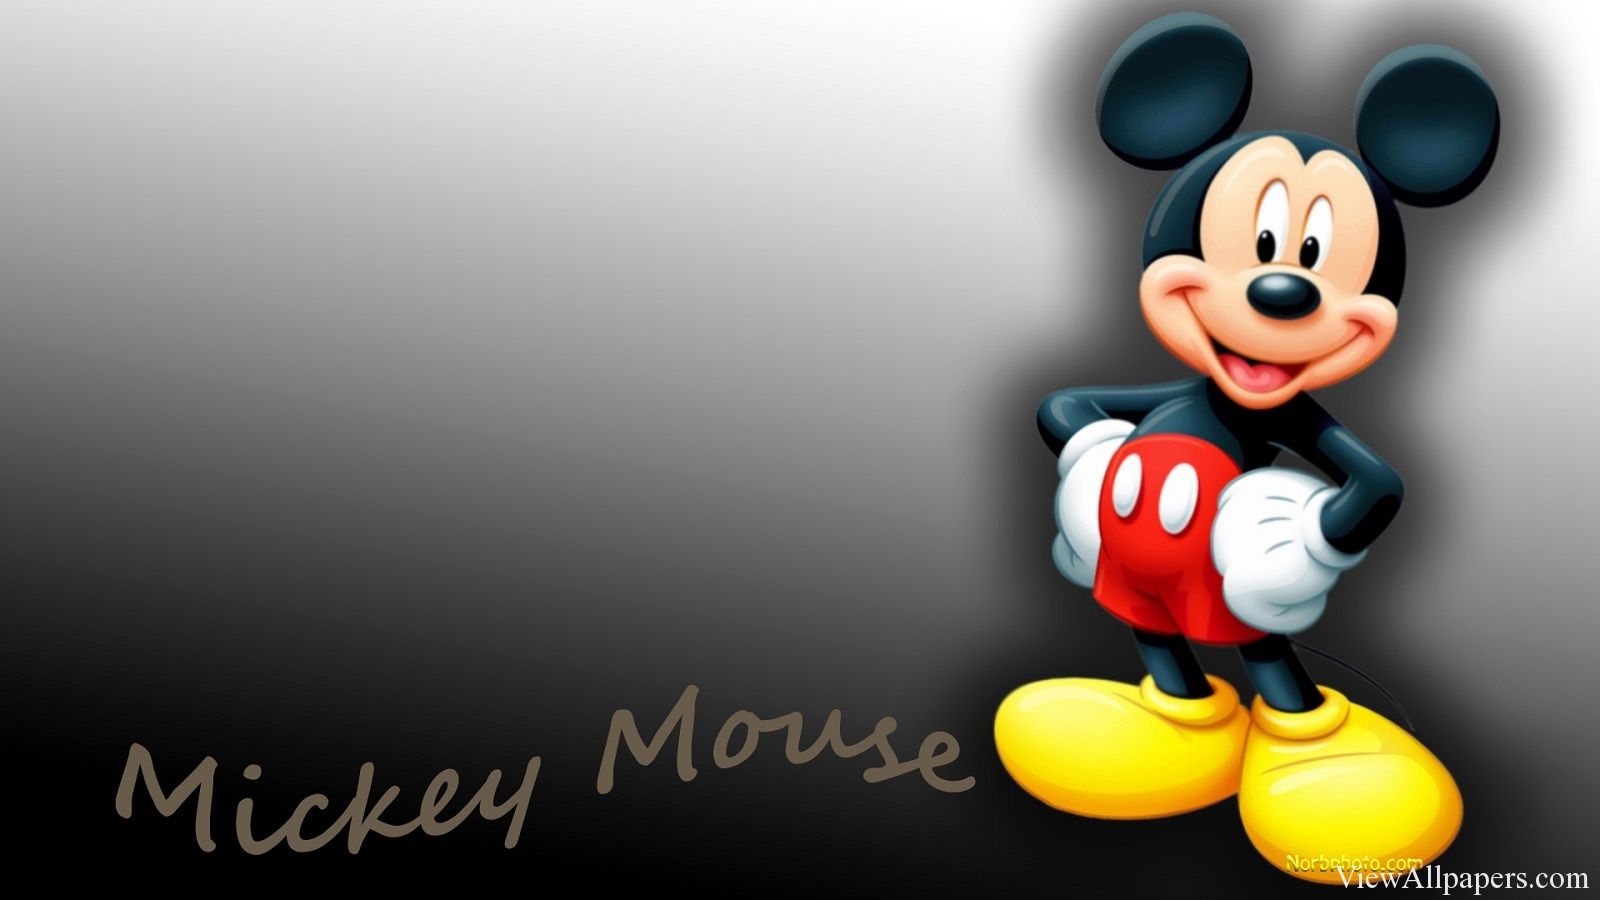 Free download Wallpaper download Mickey Mouse Disney For PC